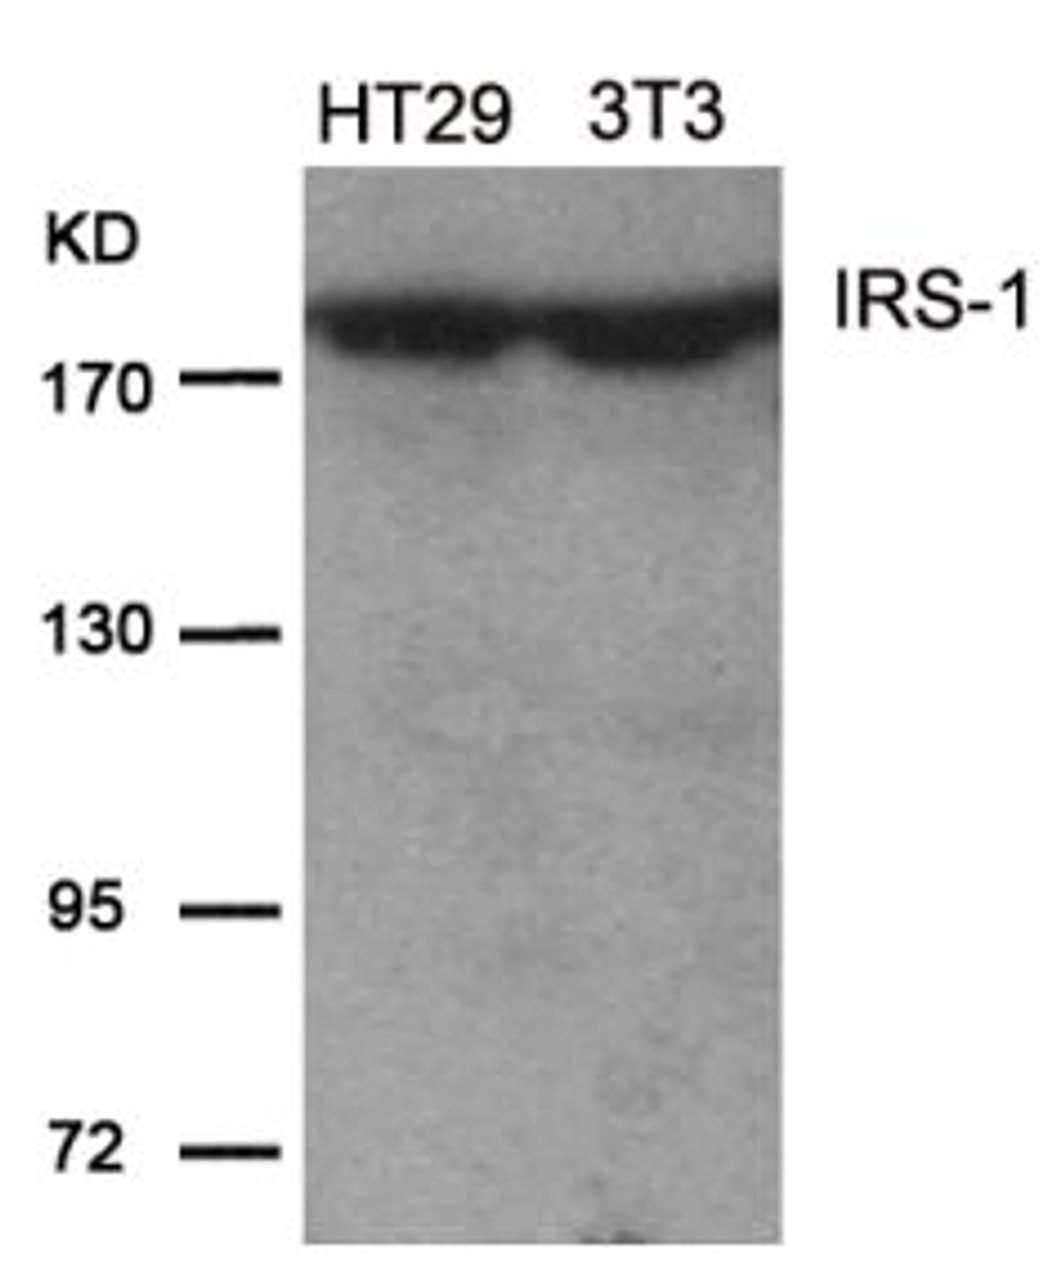 Western blot analysis of lysed extracts from HT29 and 3T3 cells using IRS-1 (Ab-639) .